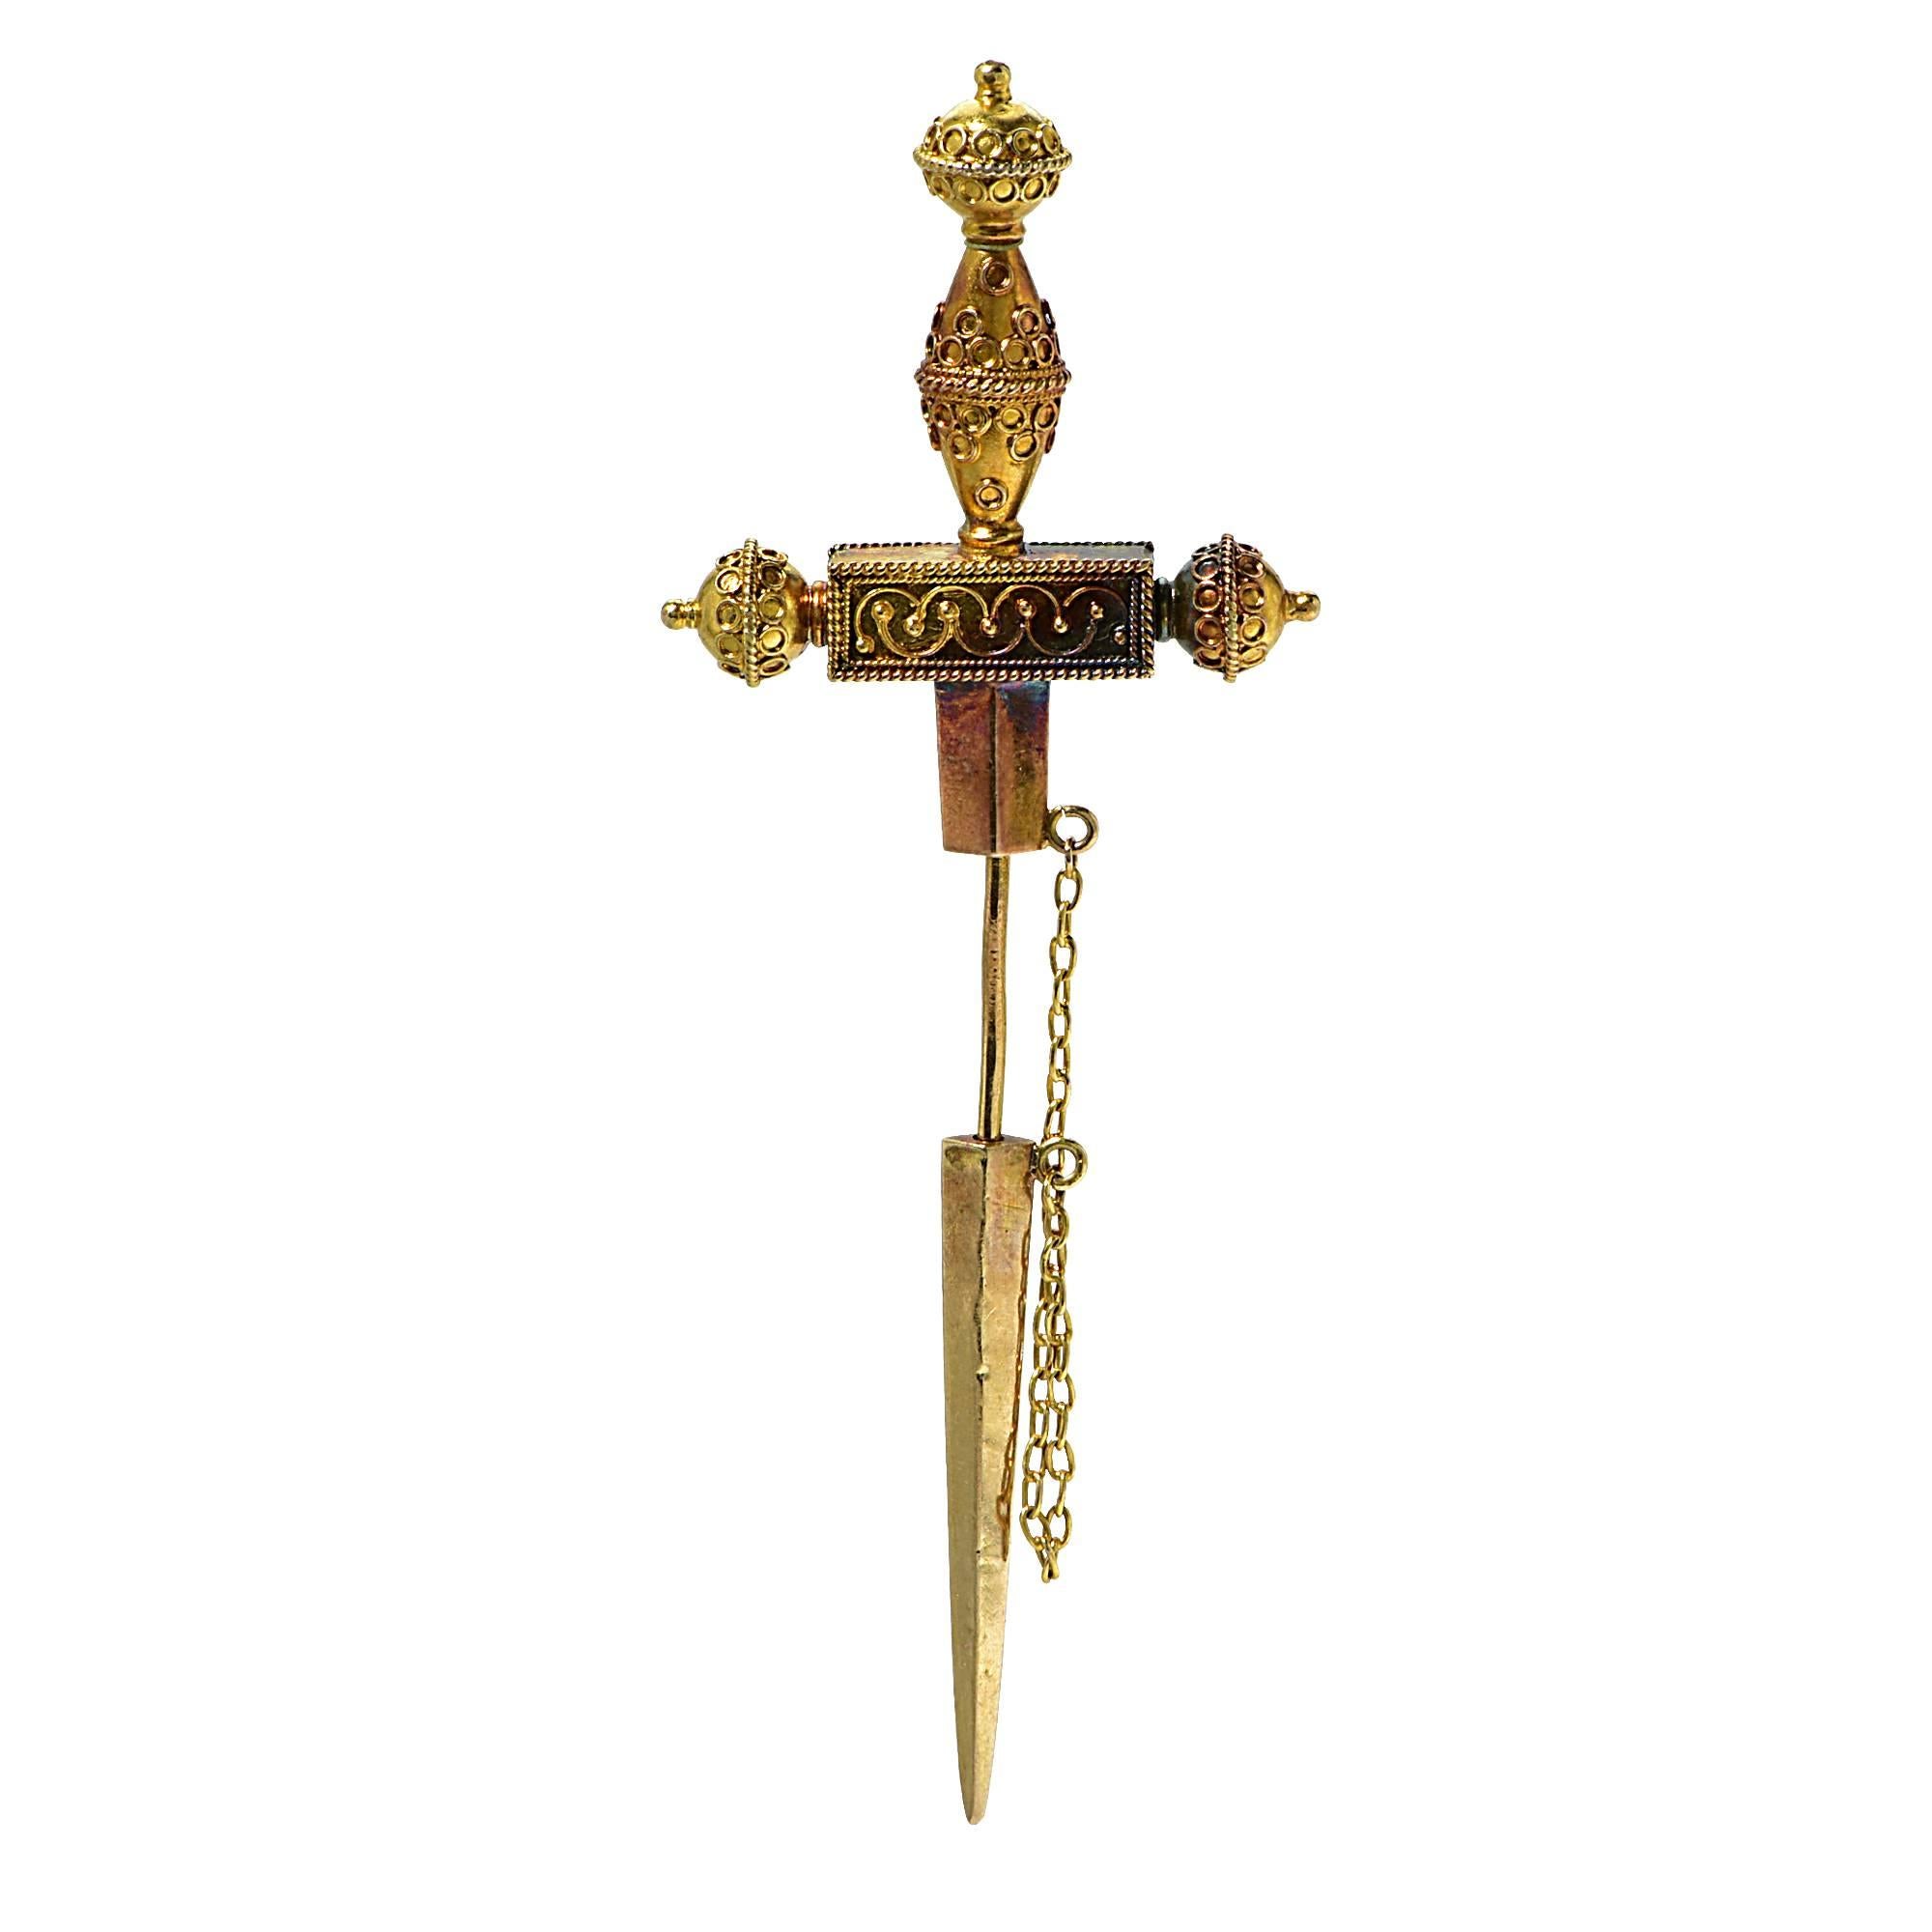 Victorian jabot cross with pearls in yellow gold.

Metal weight: 2.79 grams

This brooch is accompanied by a retail appraisal performed by a Graduate Gemologist.